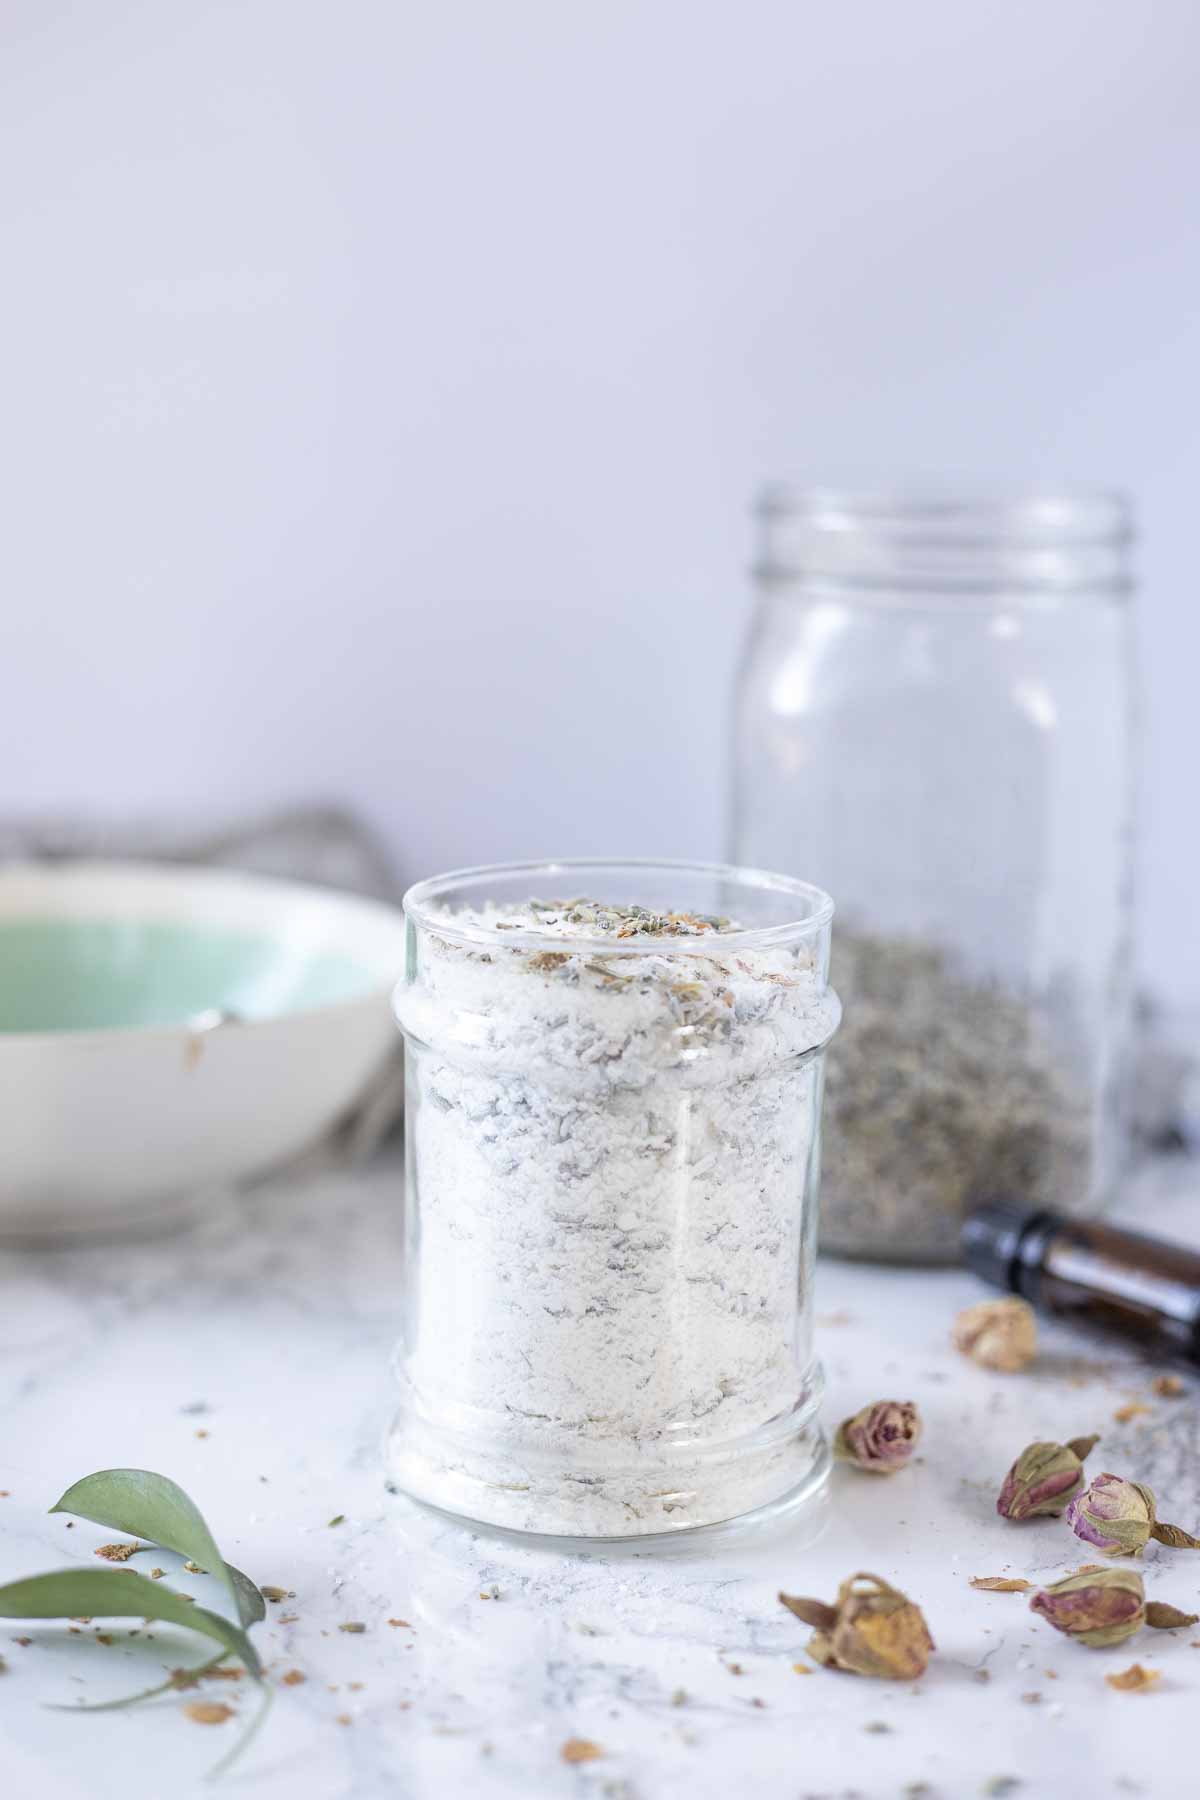 Sideview of a glass container of bath salts with dried flowers on a marble countertop with more dried flowers and glass containers.